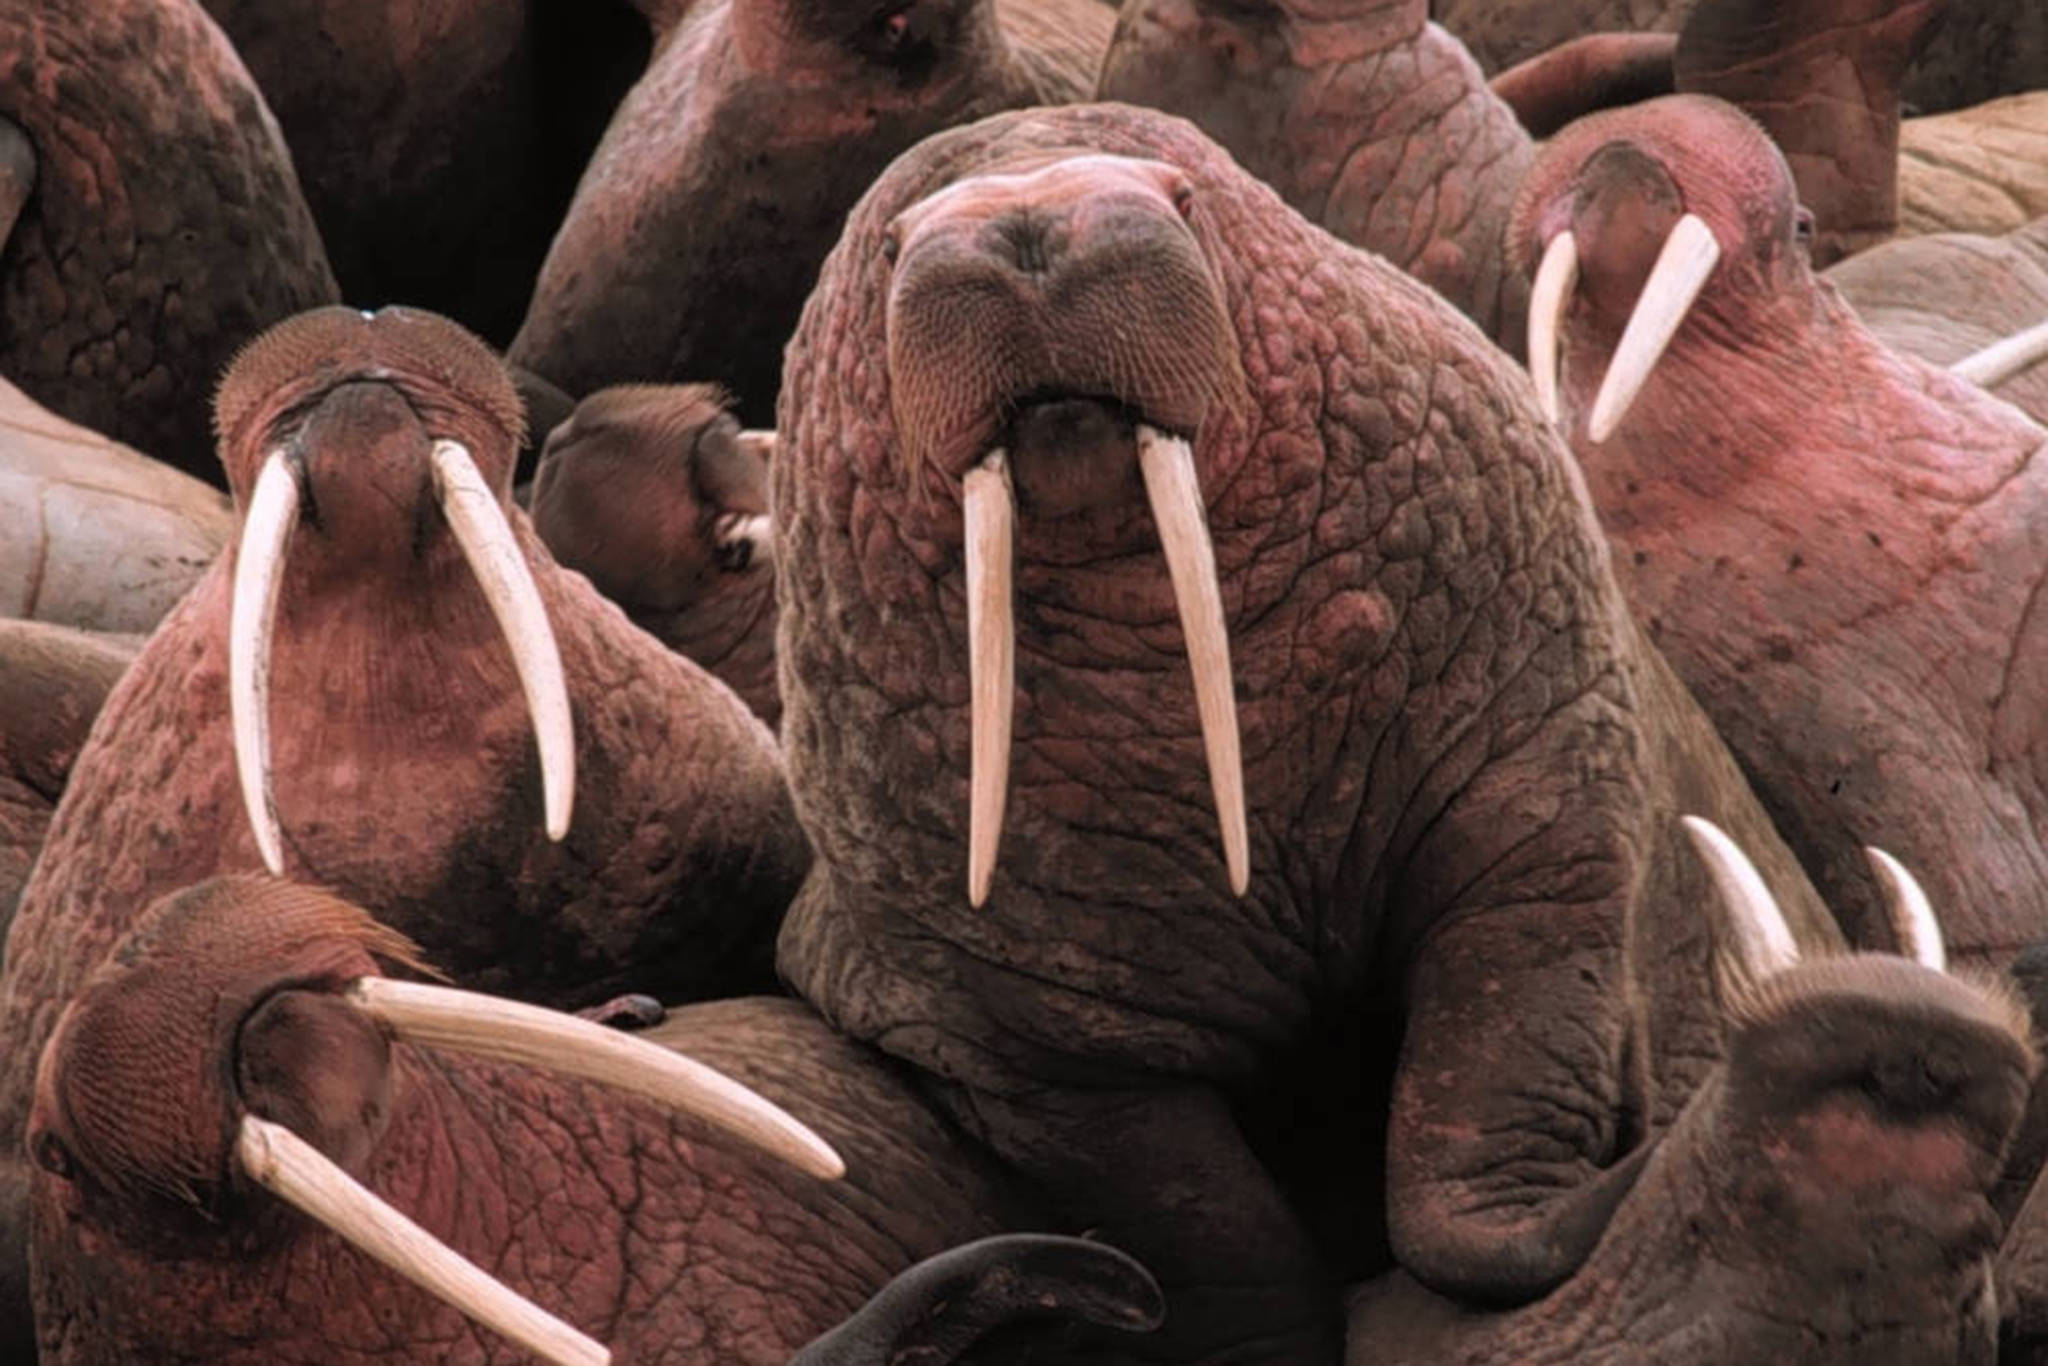 Walruses are pictured in this courtesy photo. (Courtesy Photo | USFWS National Digital Library)